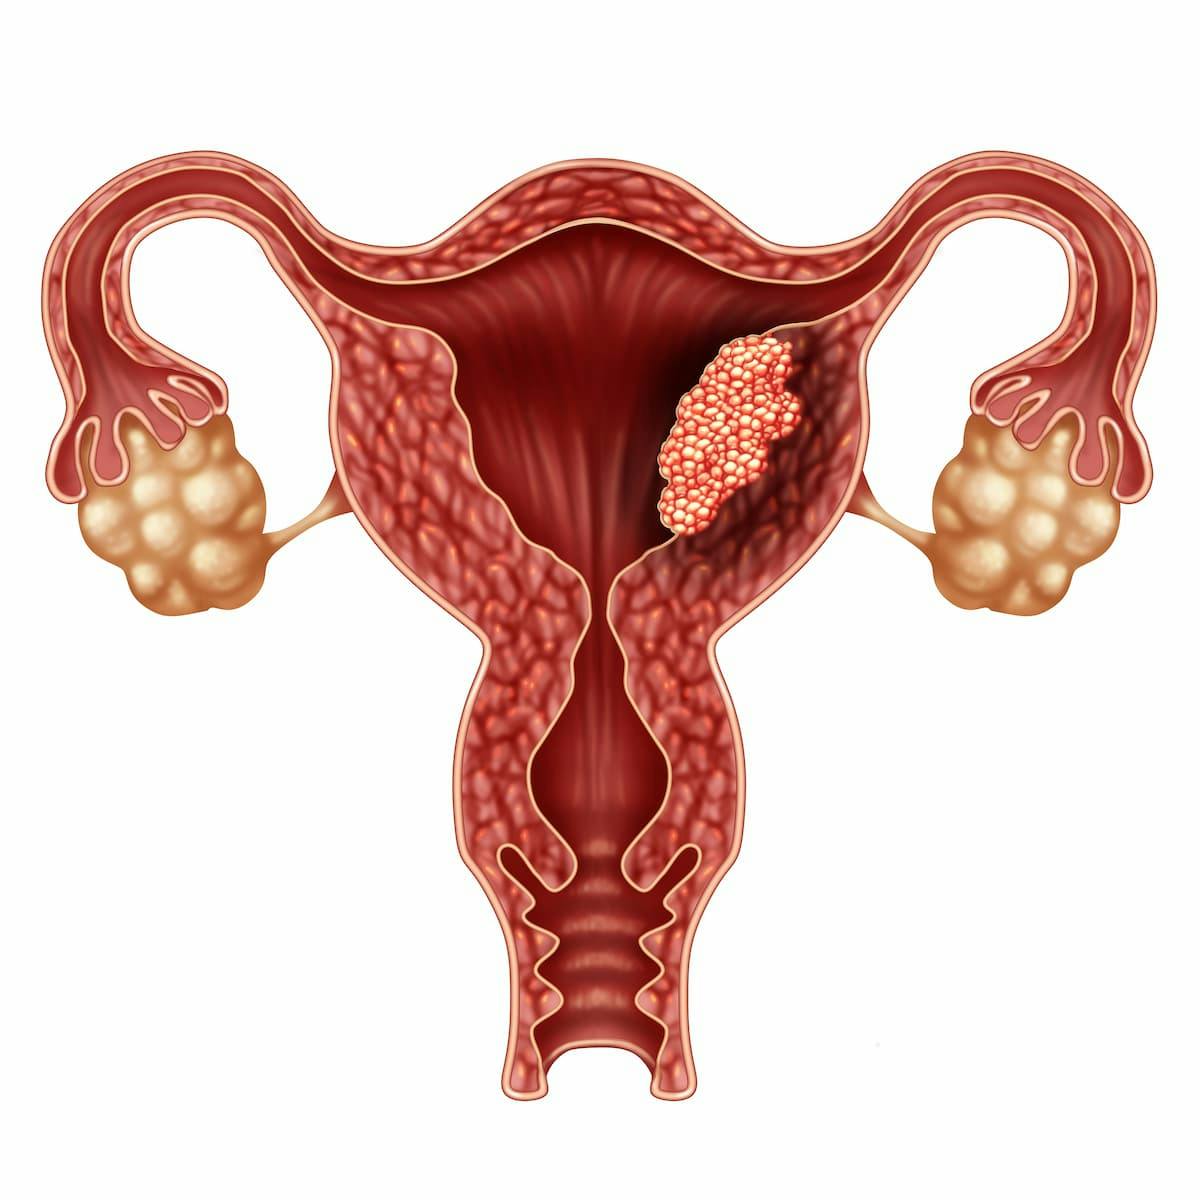 DUO-E Trial Meets PFS End Point in Advanced/Recurrent Endometrial Cancer | Image Credit: © freshidea - stock.adobe.com.